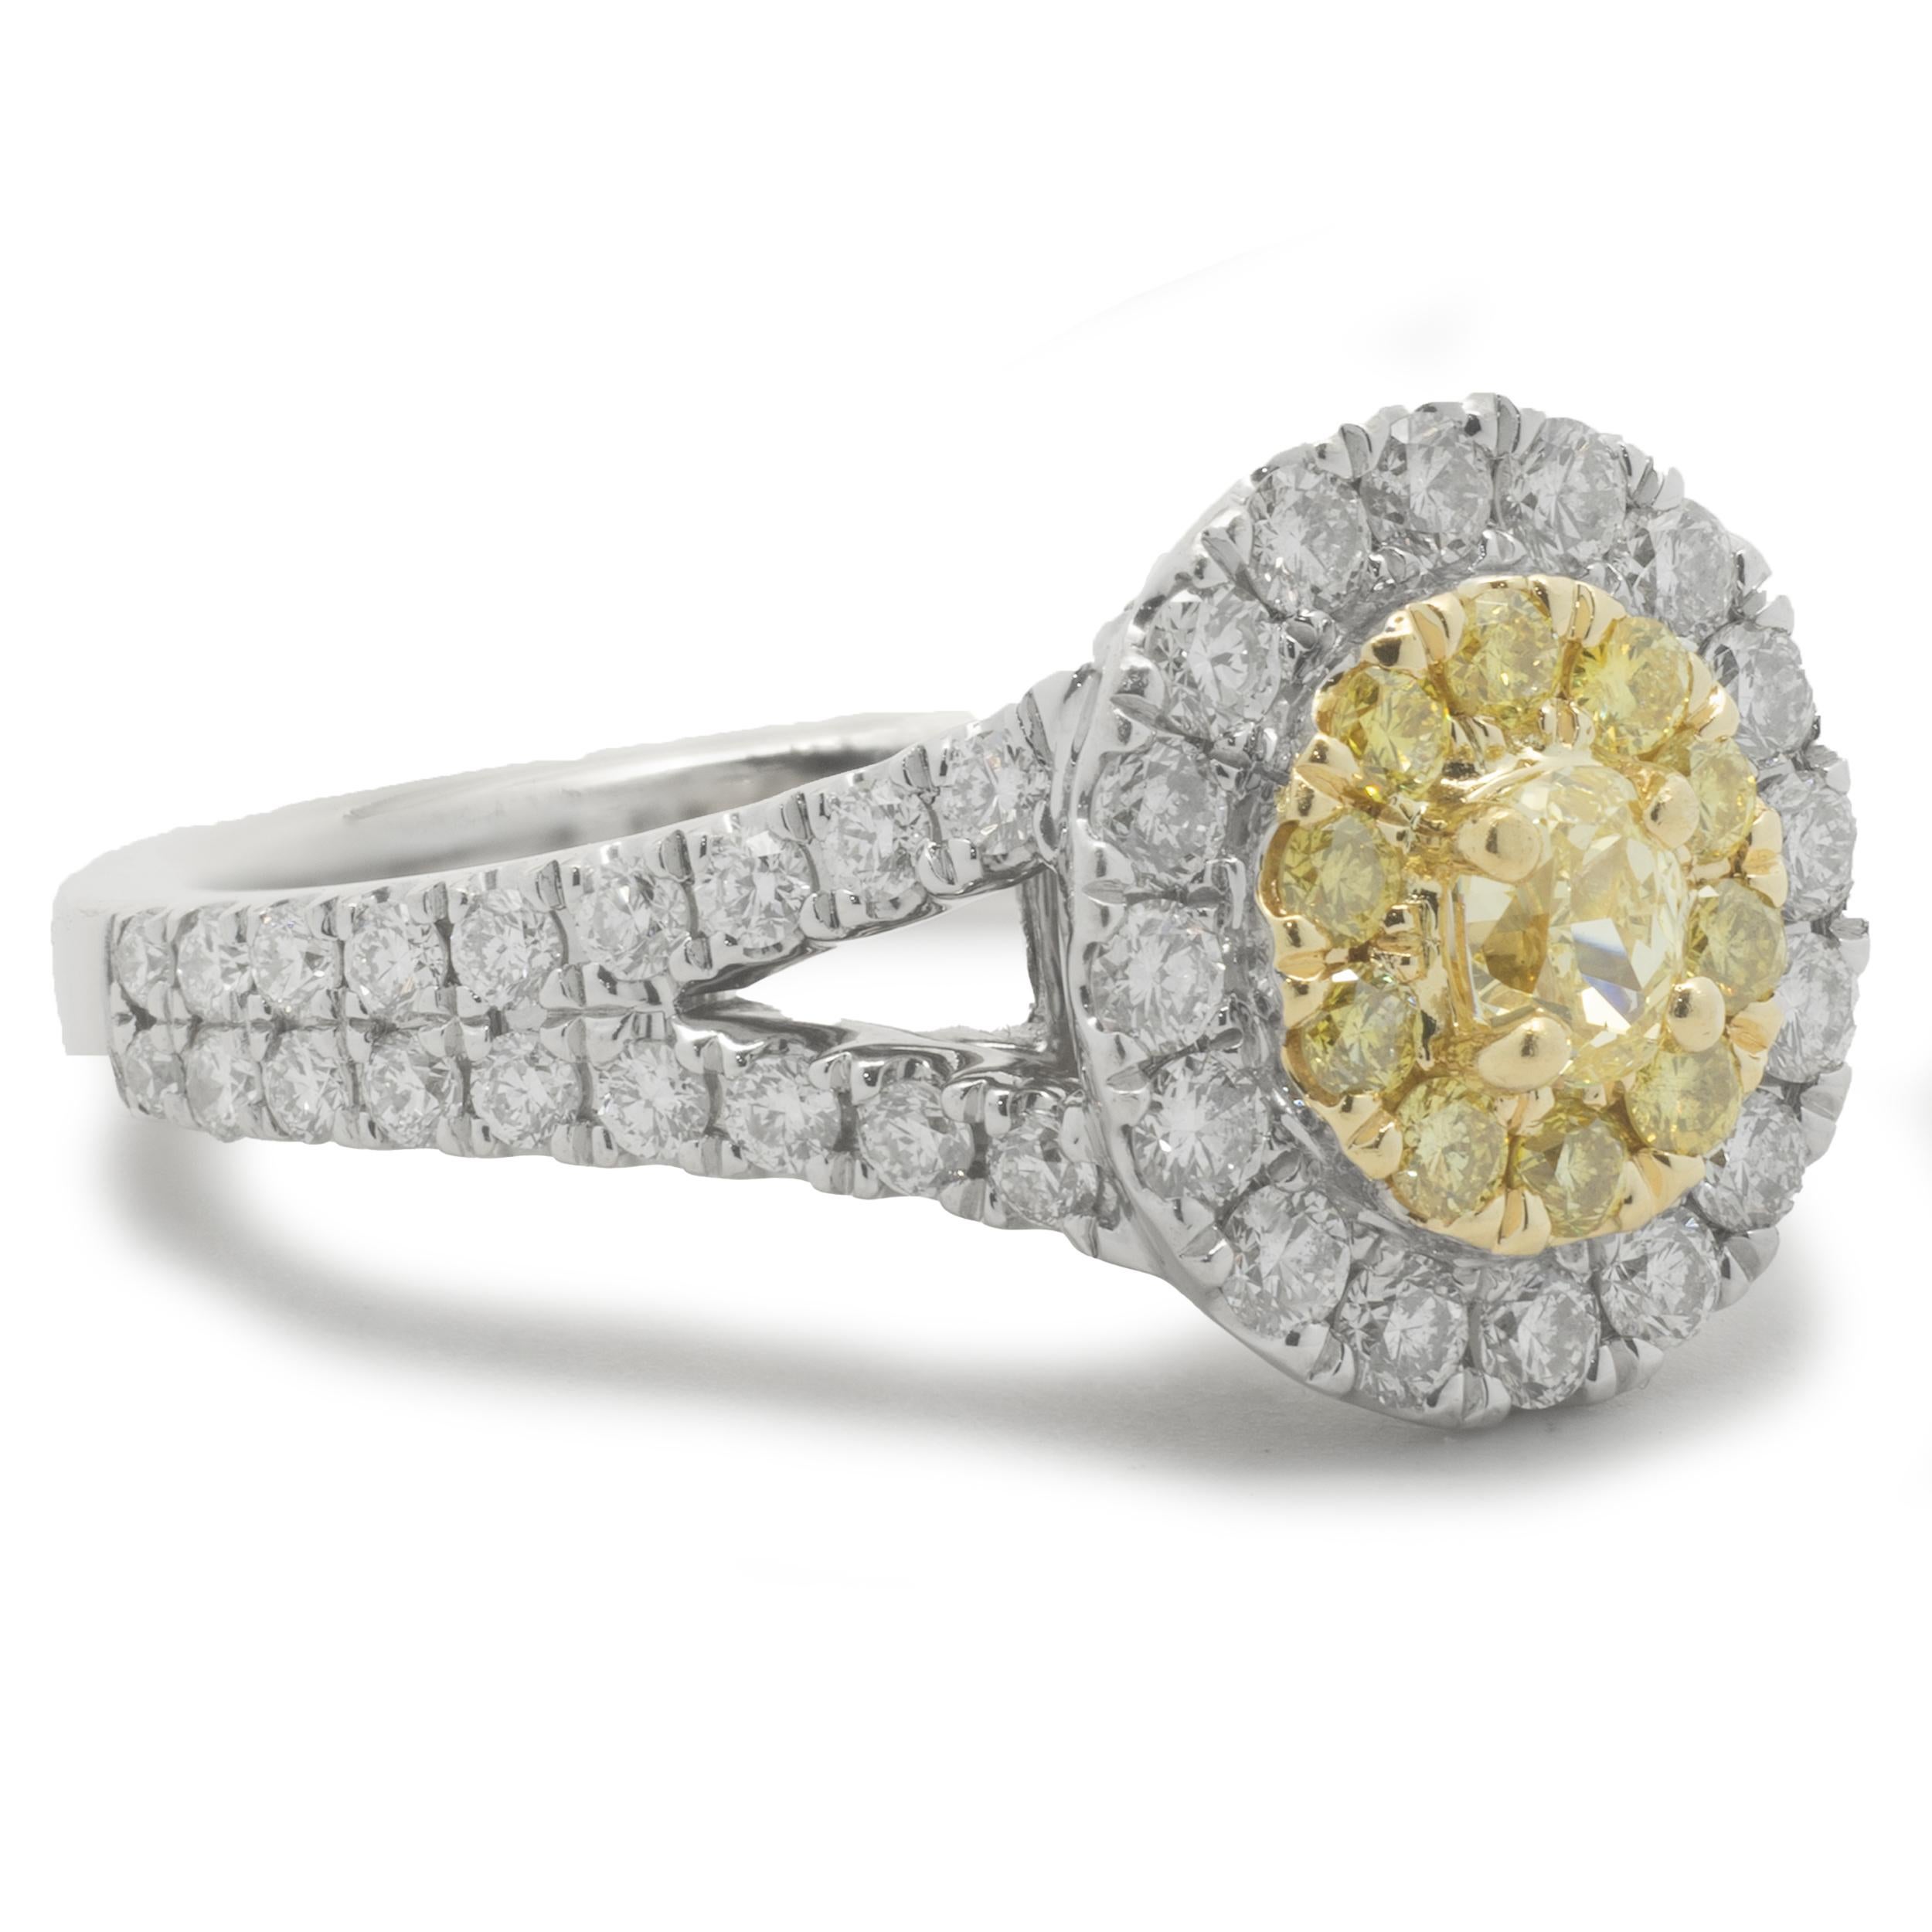 Designer: custom
Material: 18K white gold
Diamond: 11 round brilliant cut = .30cttw
Color: Fancy Yellow
Clarity: SI1
Diamond: 52 round brilliant cut = .78cttw
Color: G
Clarity: SI1
Ring Size: 5.25 (please allow up to 2 additional business days for